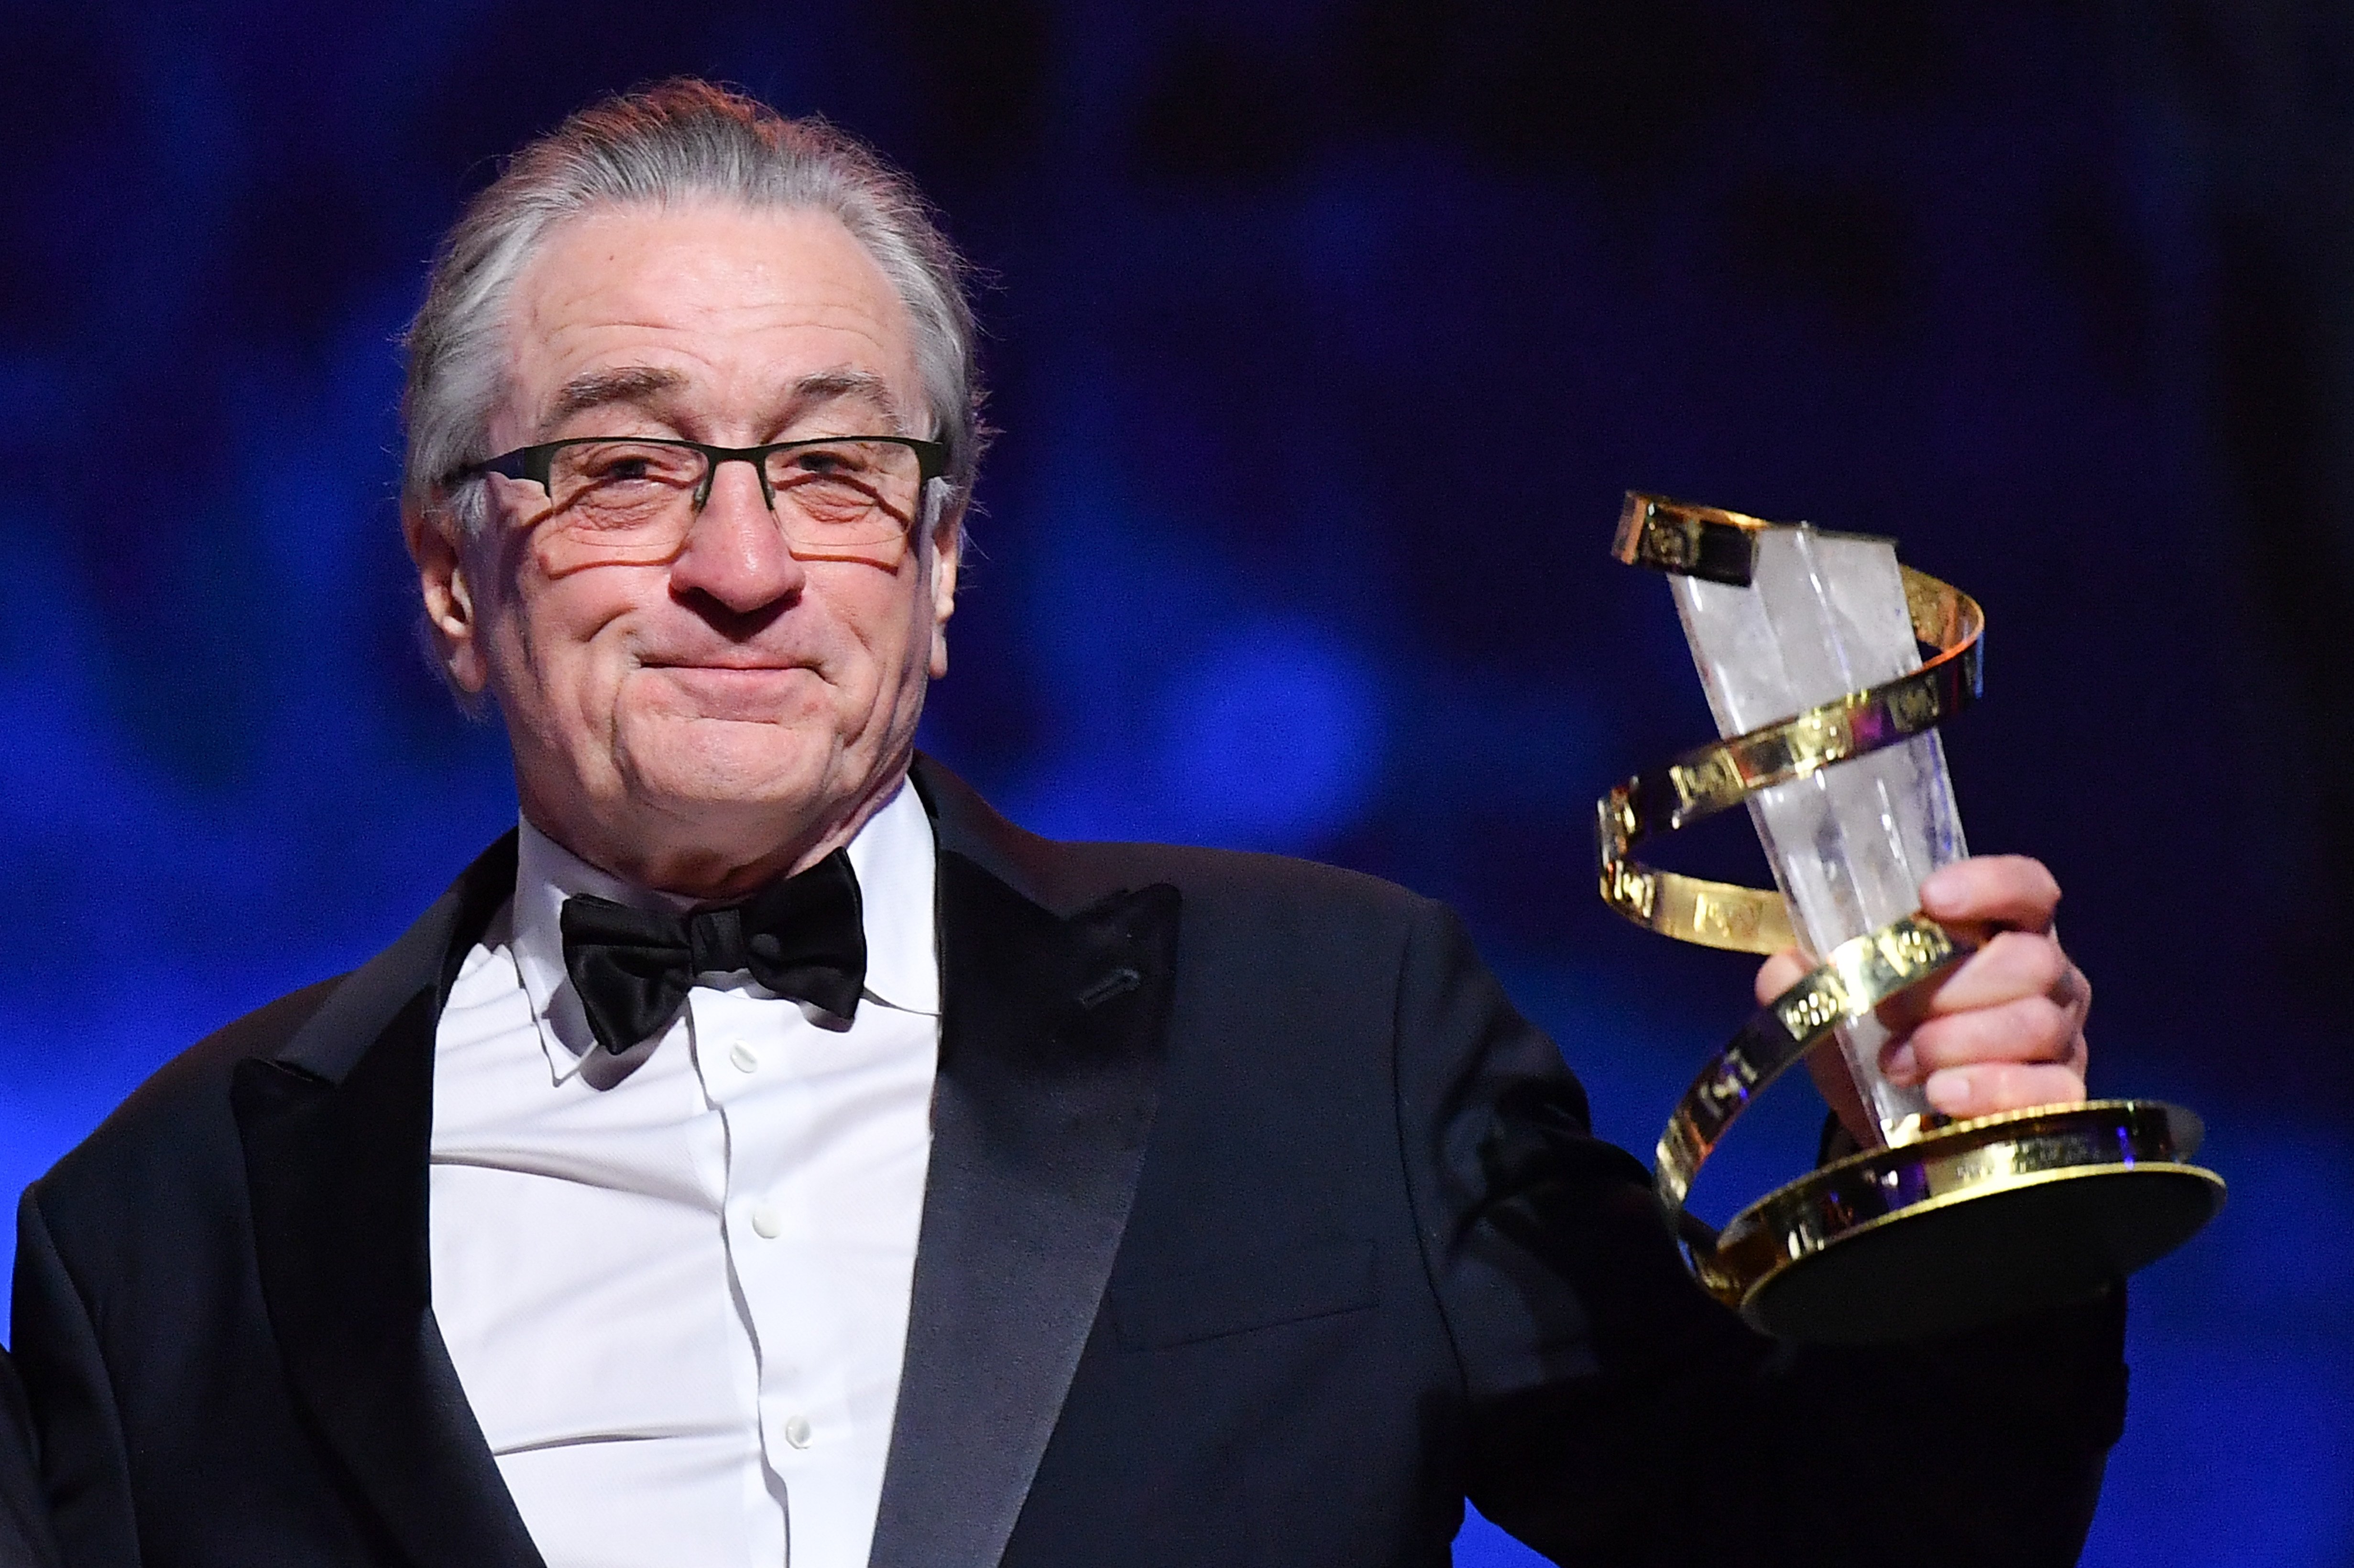 Robert De Niro with his "Etoile d'Or" Award at the 17th Marrakech International Film Festival on December 1, 2018 | Source: Getty Images